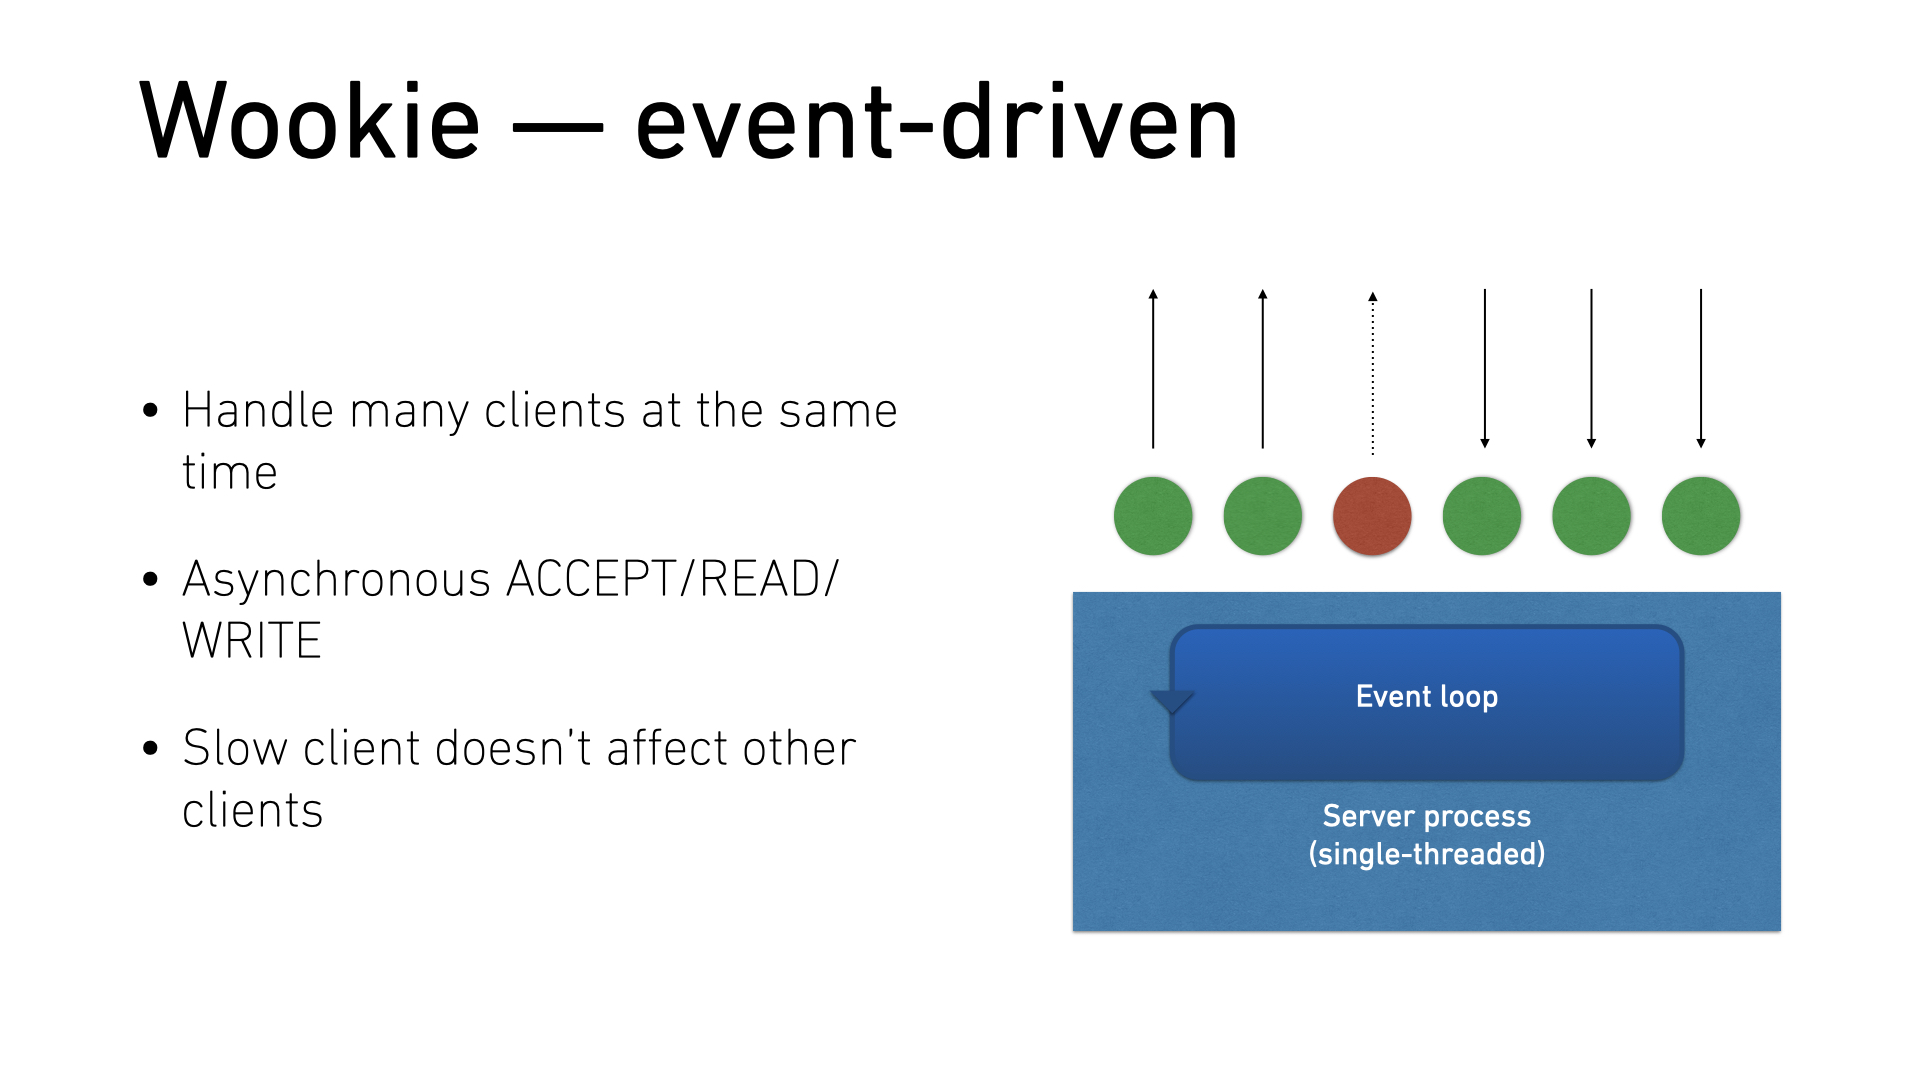 Wookie event-driven architecture